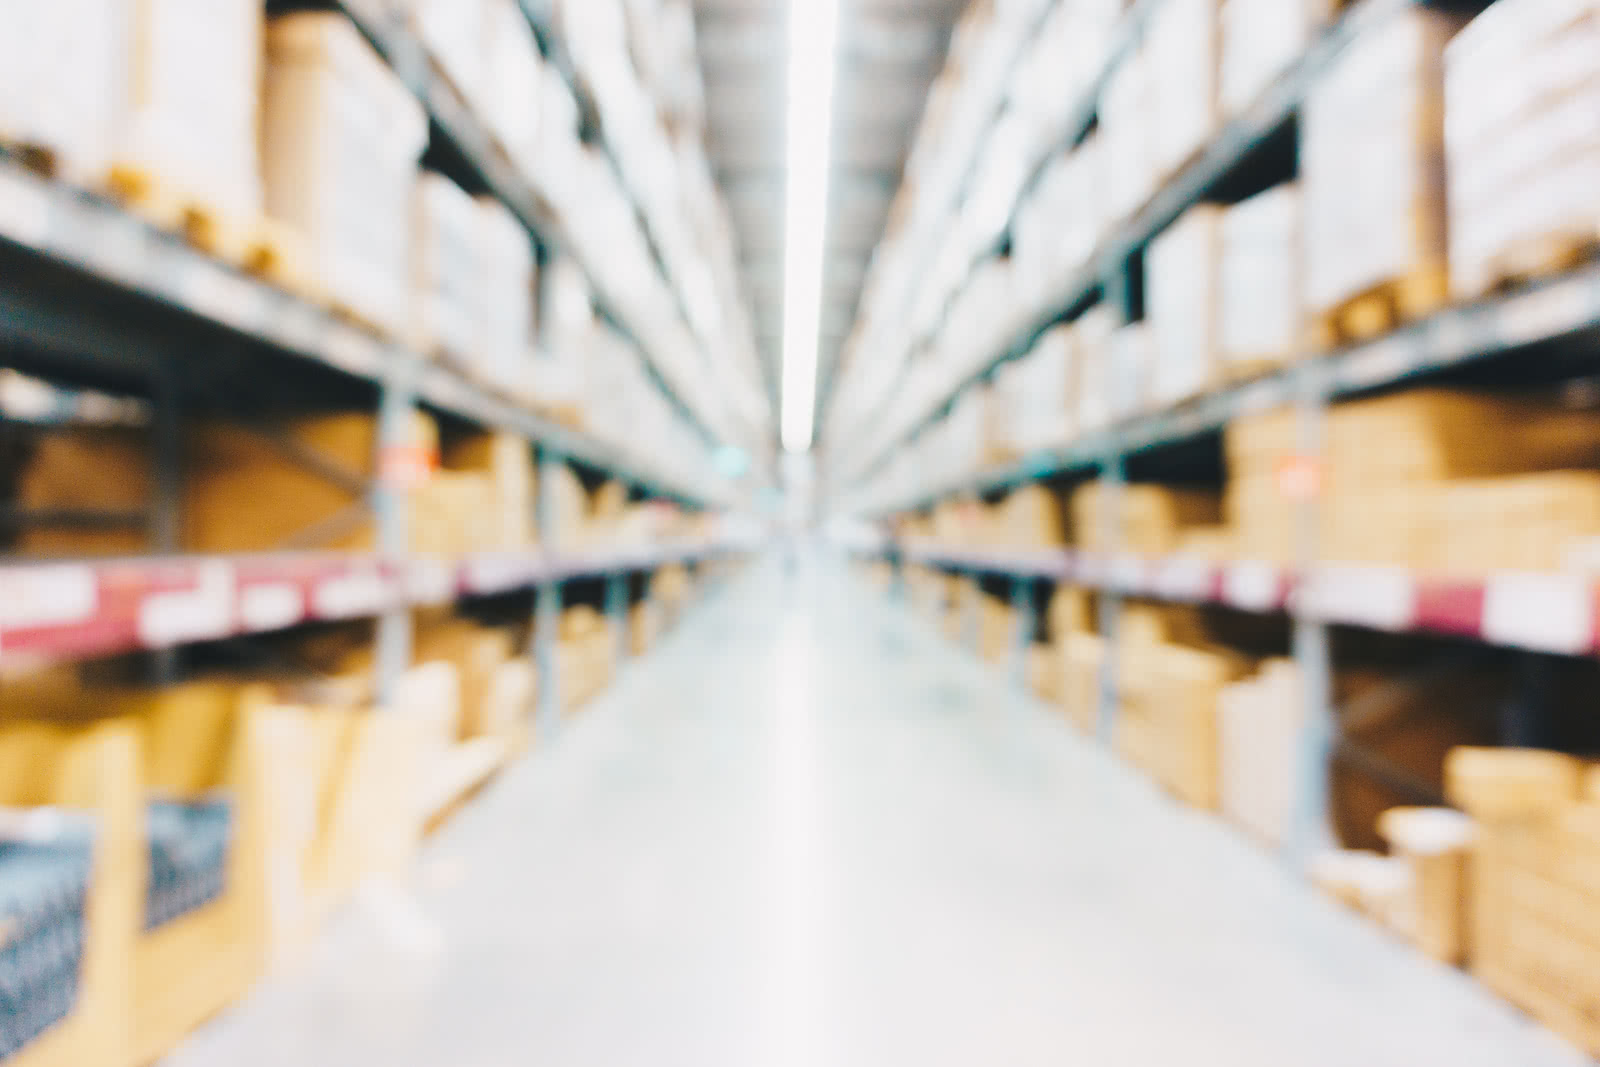 Blurred view of warehouse aisles with stocked shelves